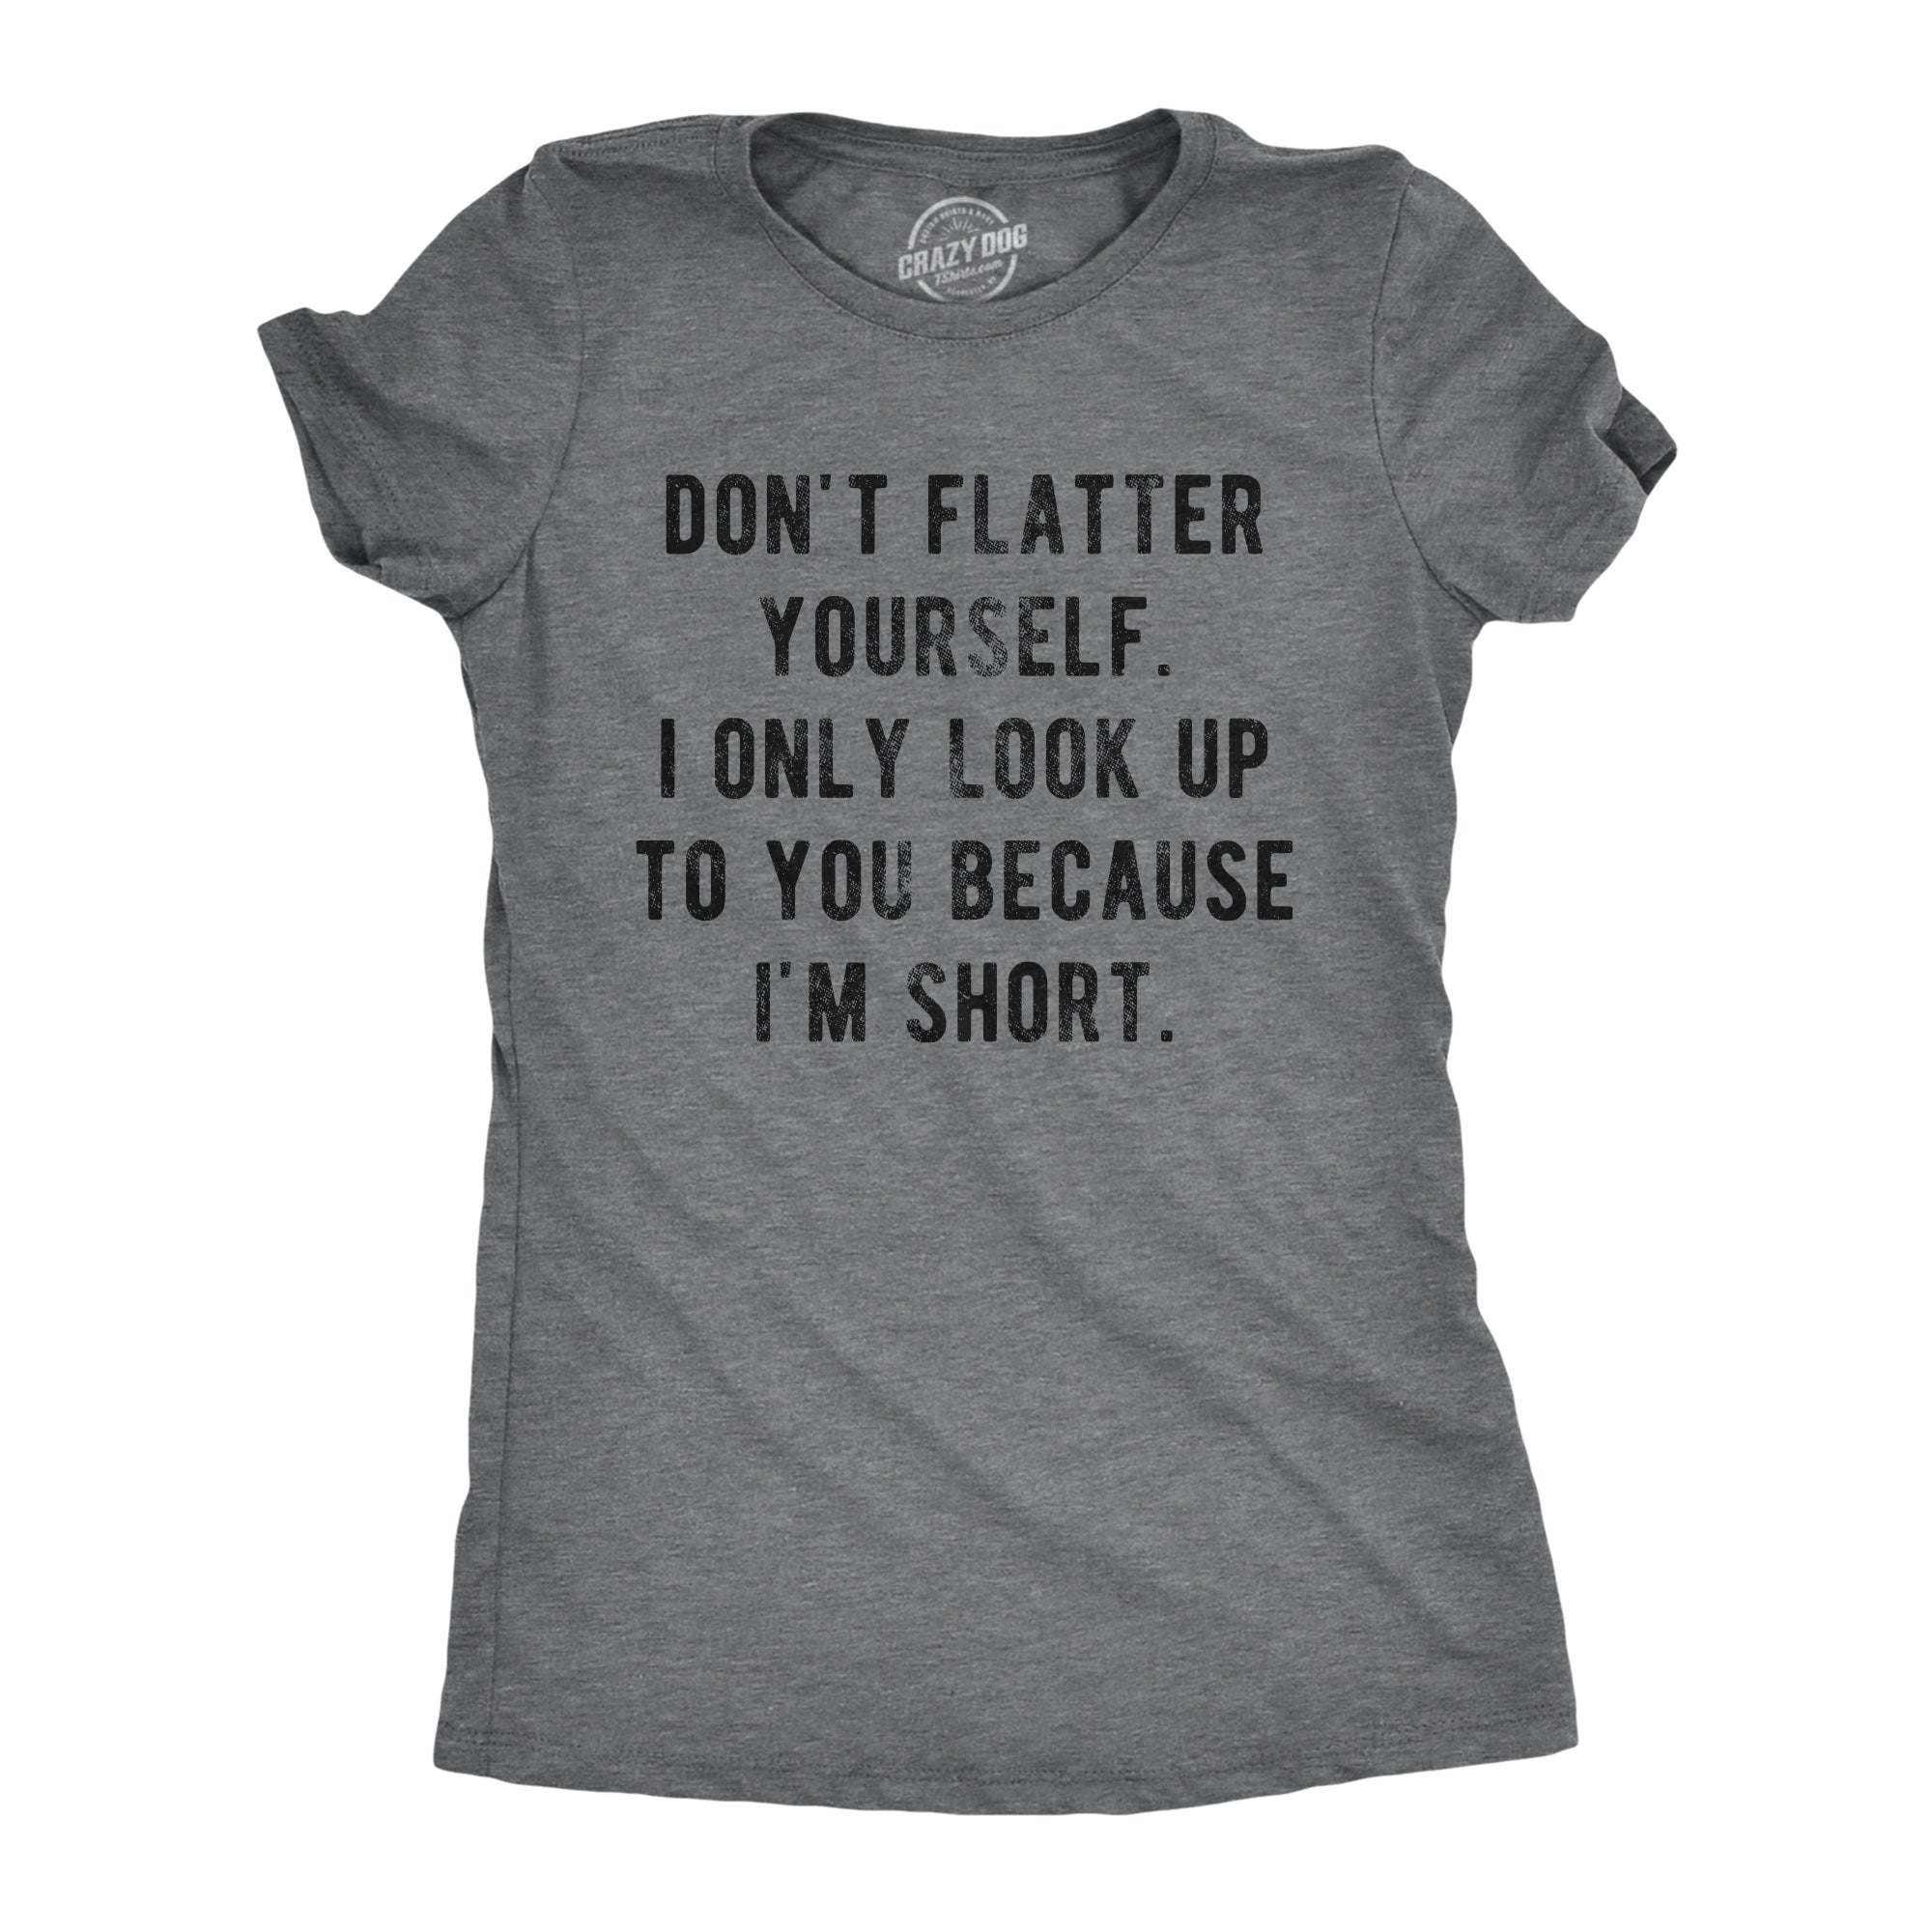 Funny Dark Heather Grey I Only Look Up To You Because I'm Short Womens T Shirt Nerdy Sarcastic Tee